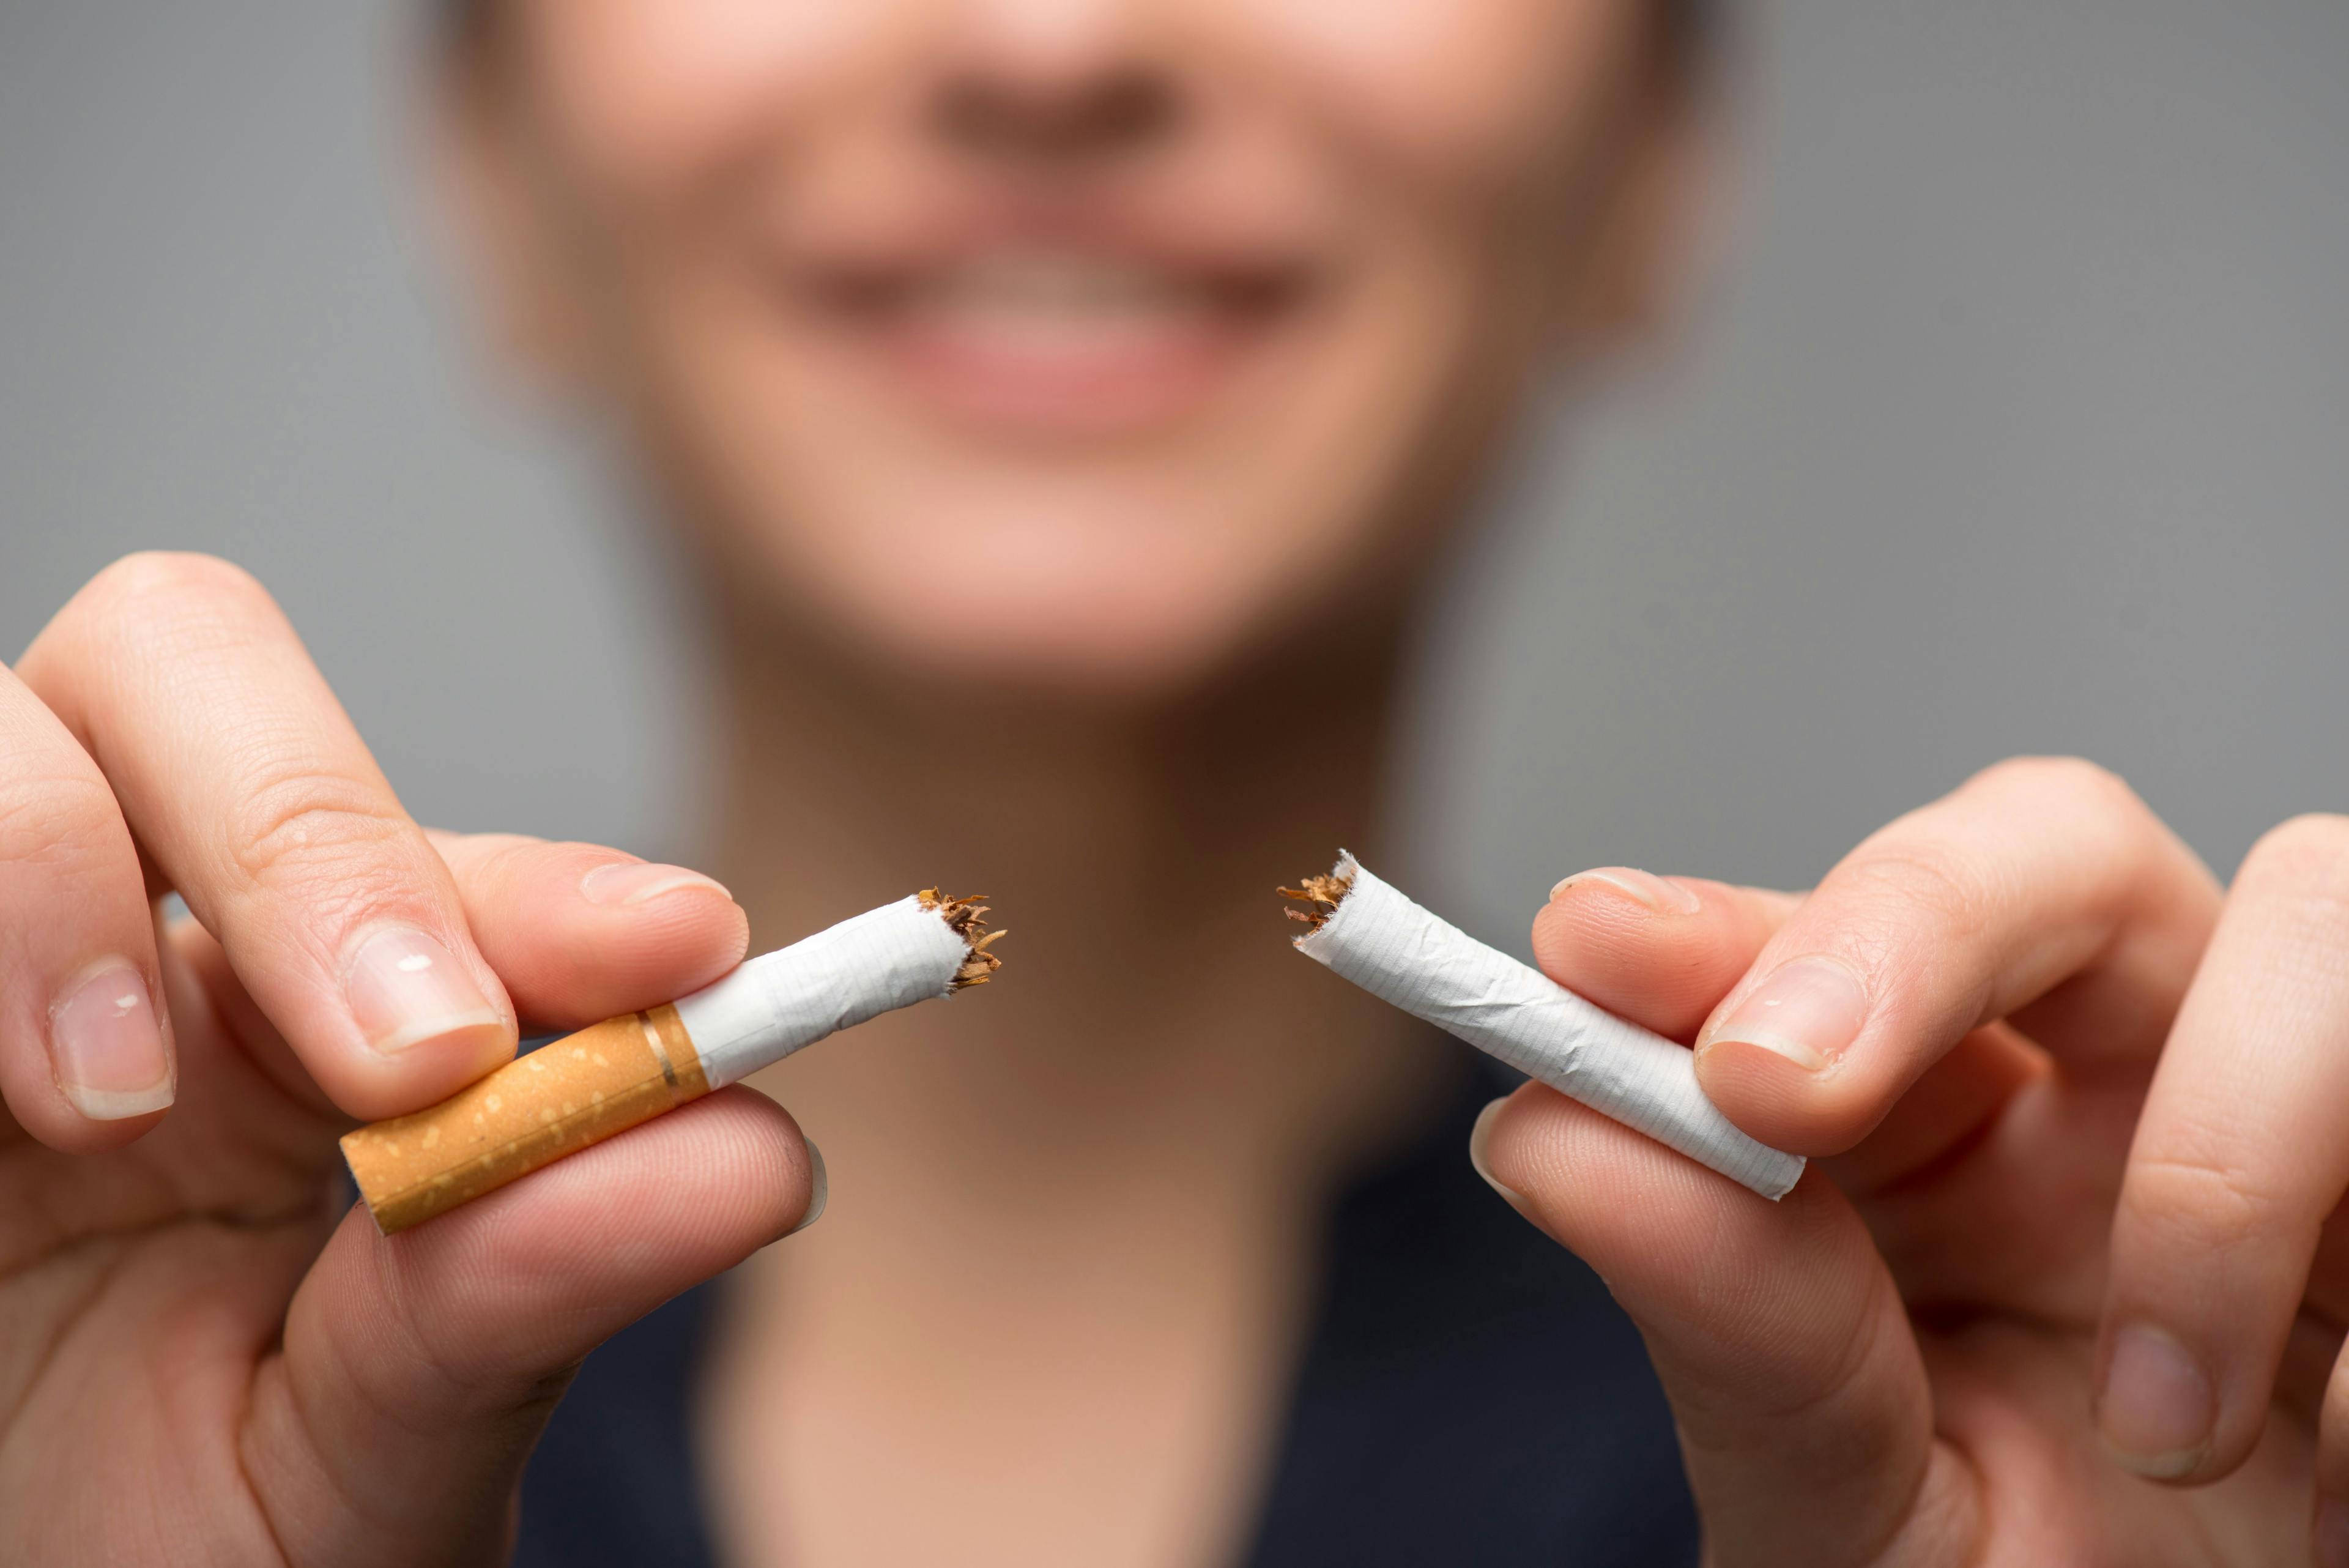 What Smoking Cessation Strategies are Most Effective for Pregnant Women?